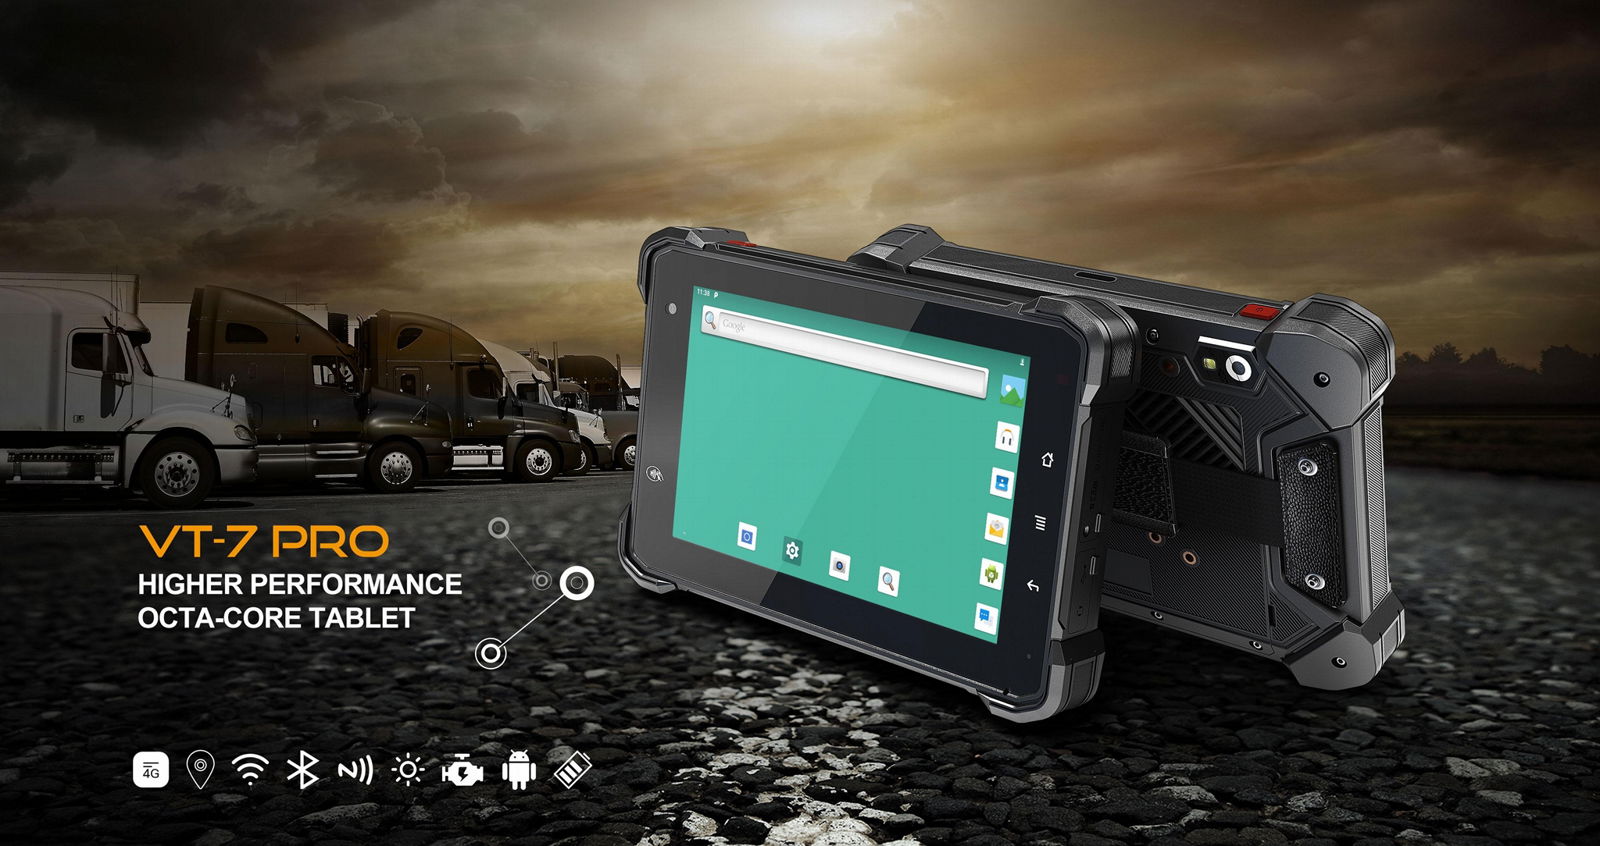 VT-7 Pro Android R   ed Tablet Embedded computer for Vehicle tracking